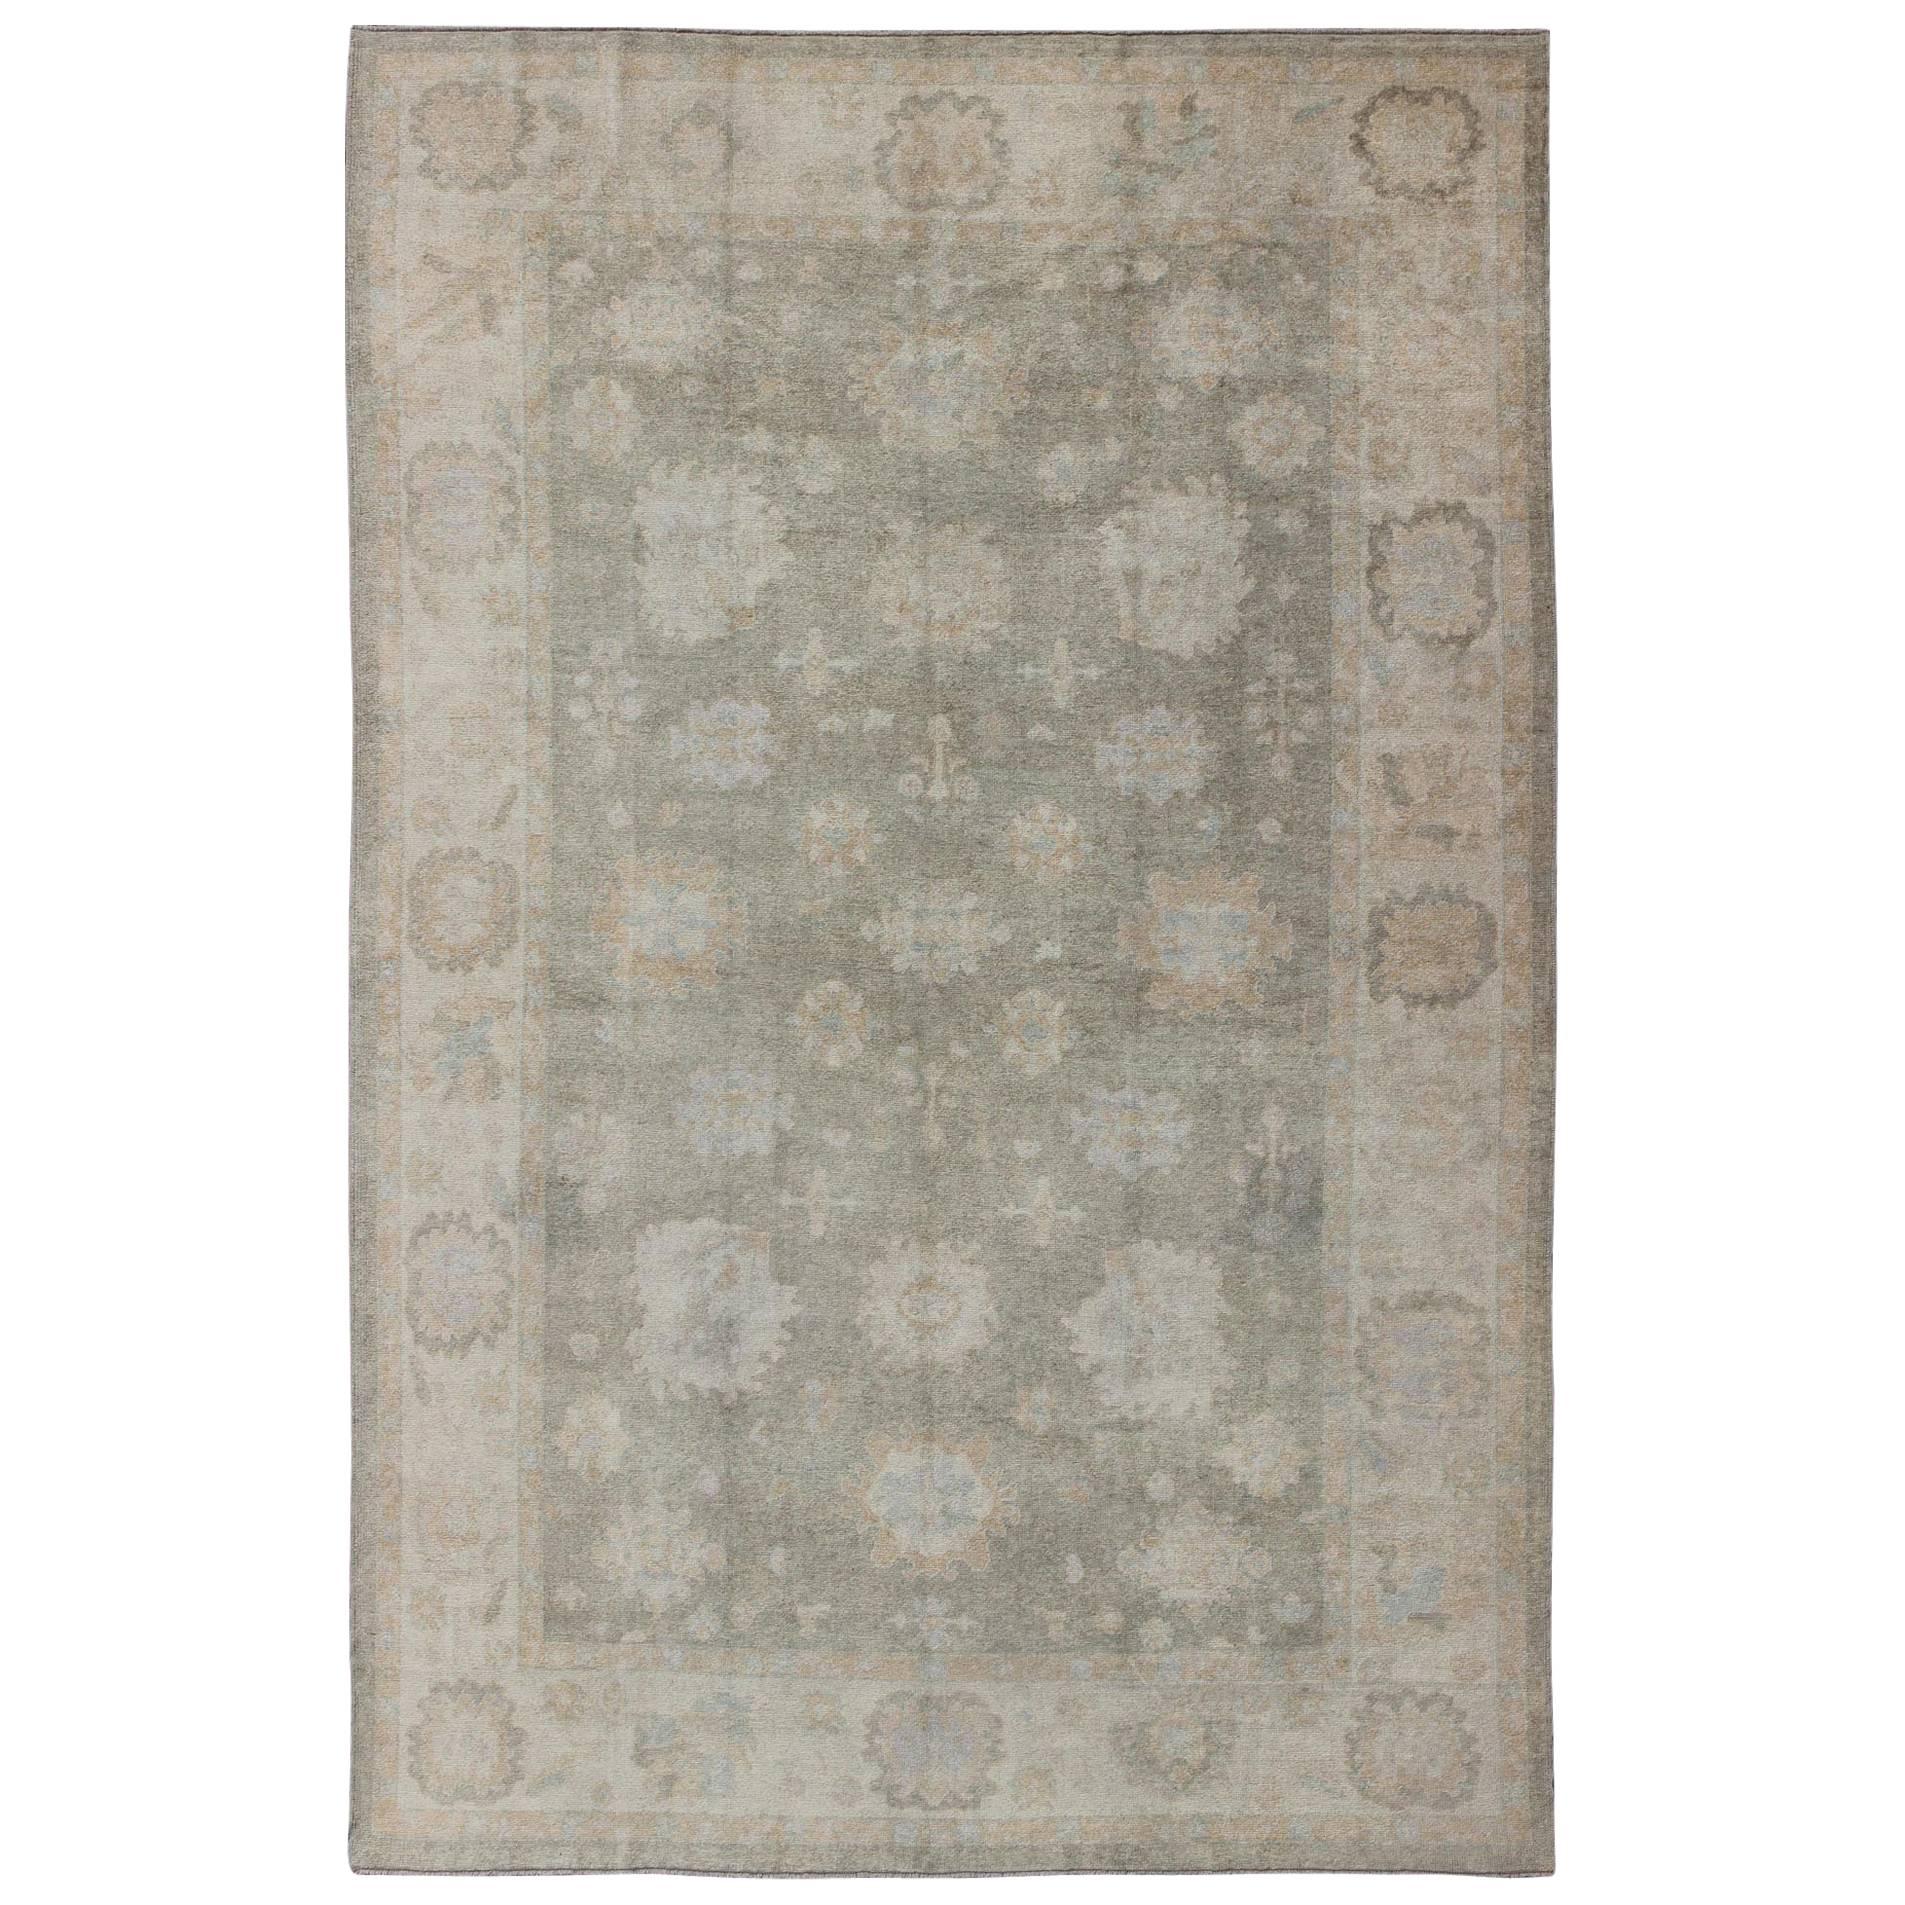 Large Turkish Oushak Rug with Large-Scale Blossom Design in Pale Moss Green